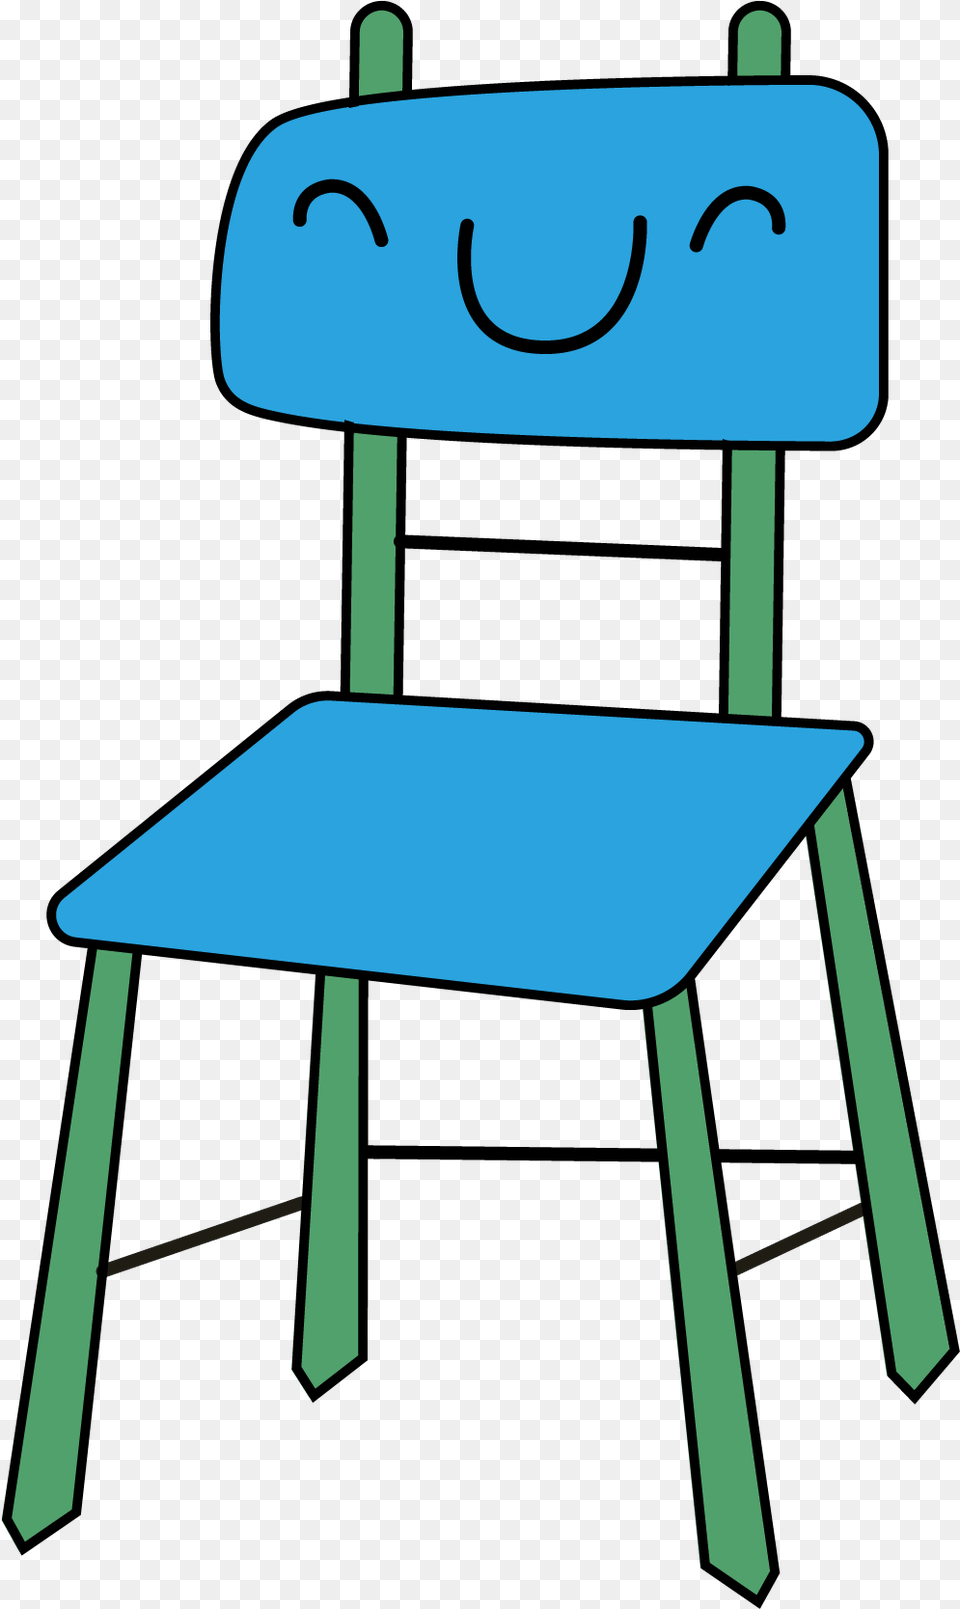 Printable Classroom Objects Flashcards, Furniture, Chair Png Image